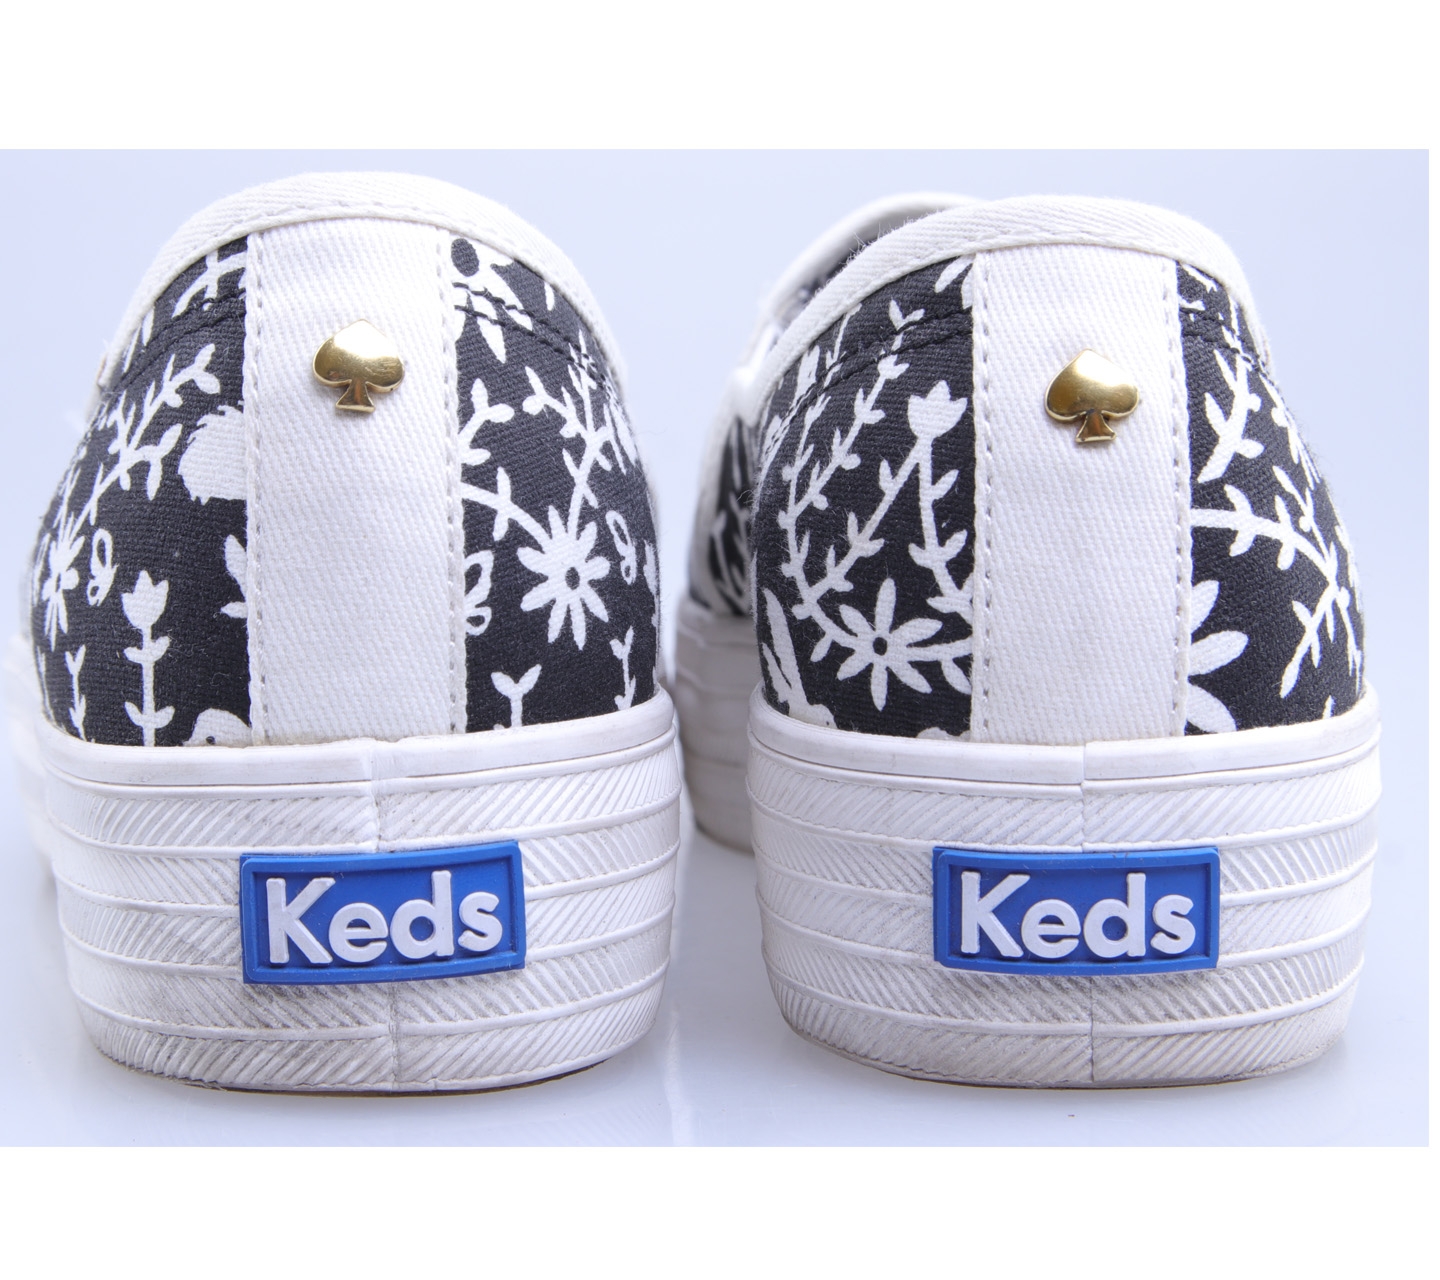 Keds For Kate Spade Black And White Slip on shoes Flats